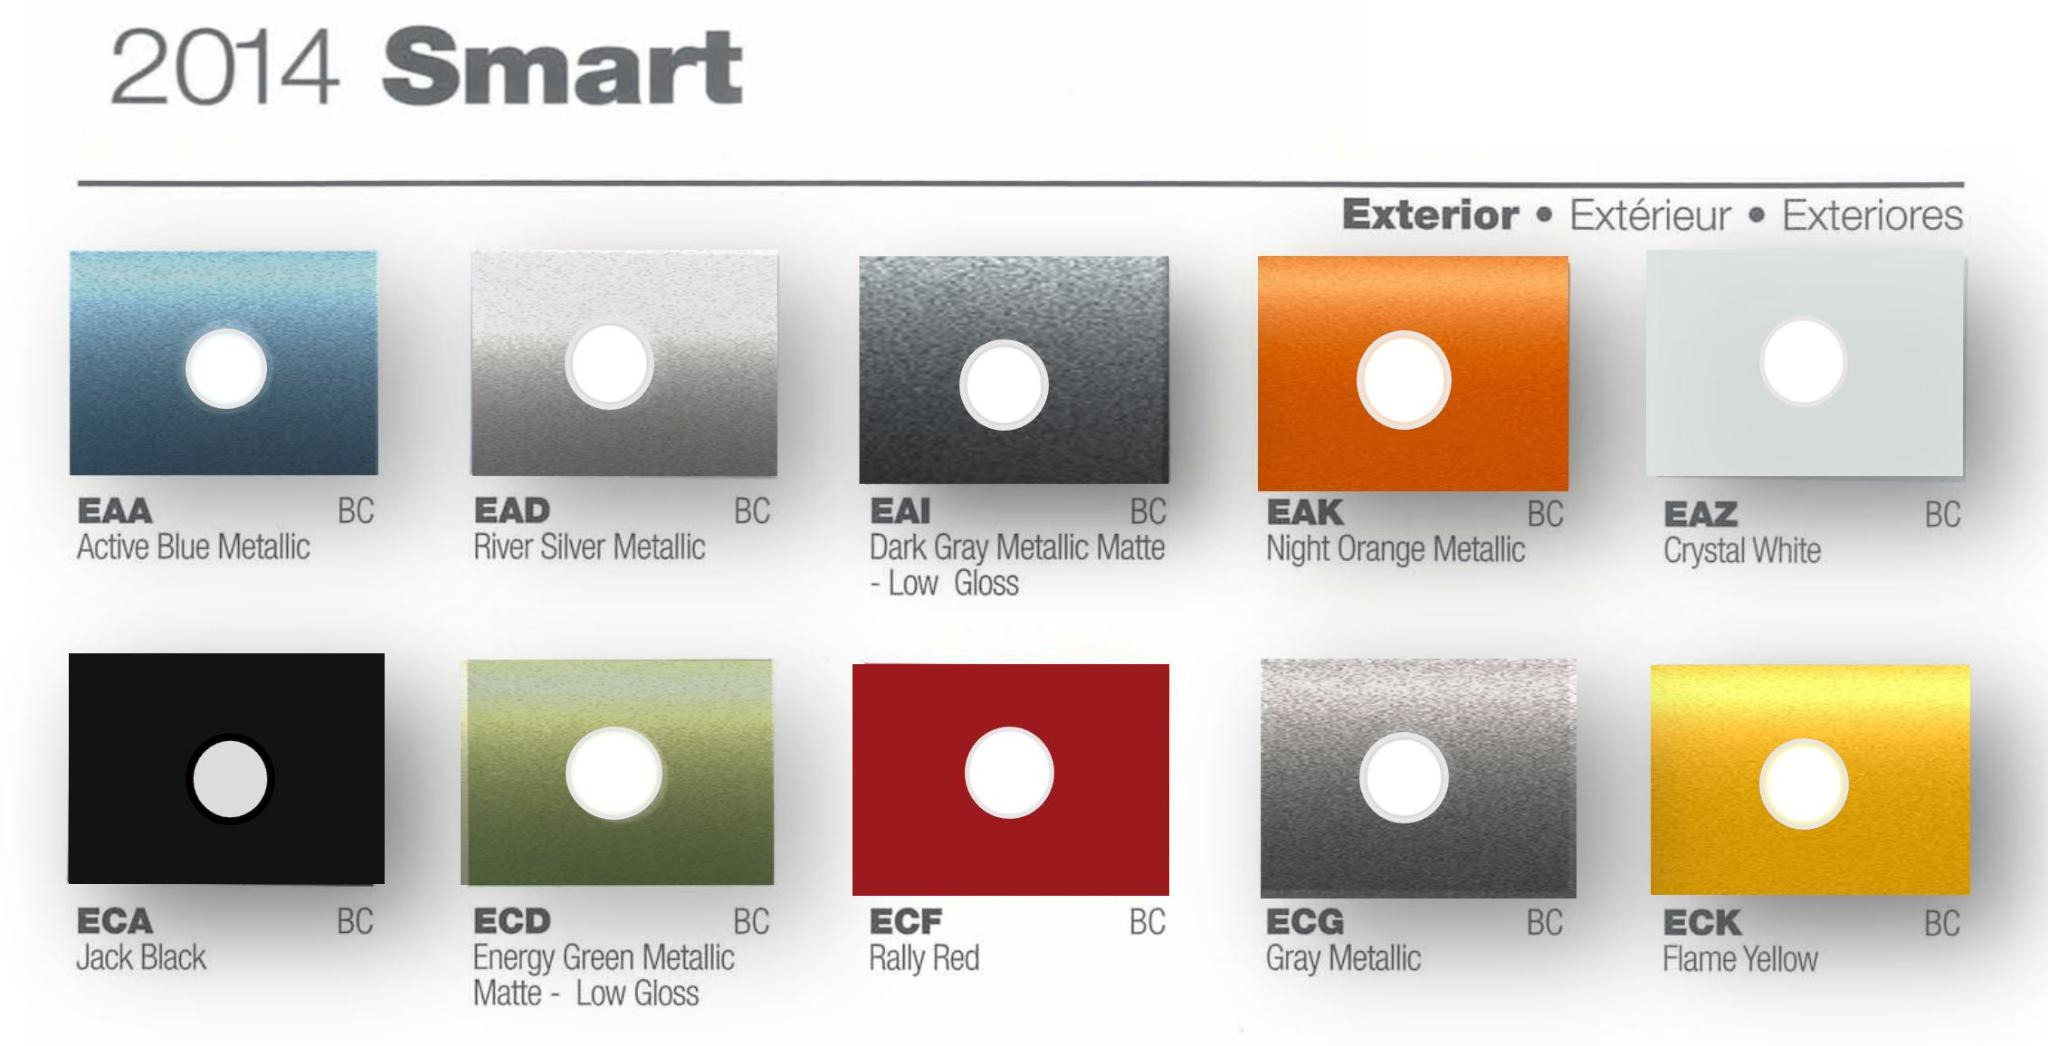 All 2014 Smart color codes